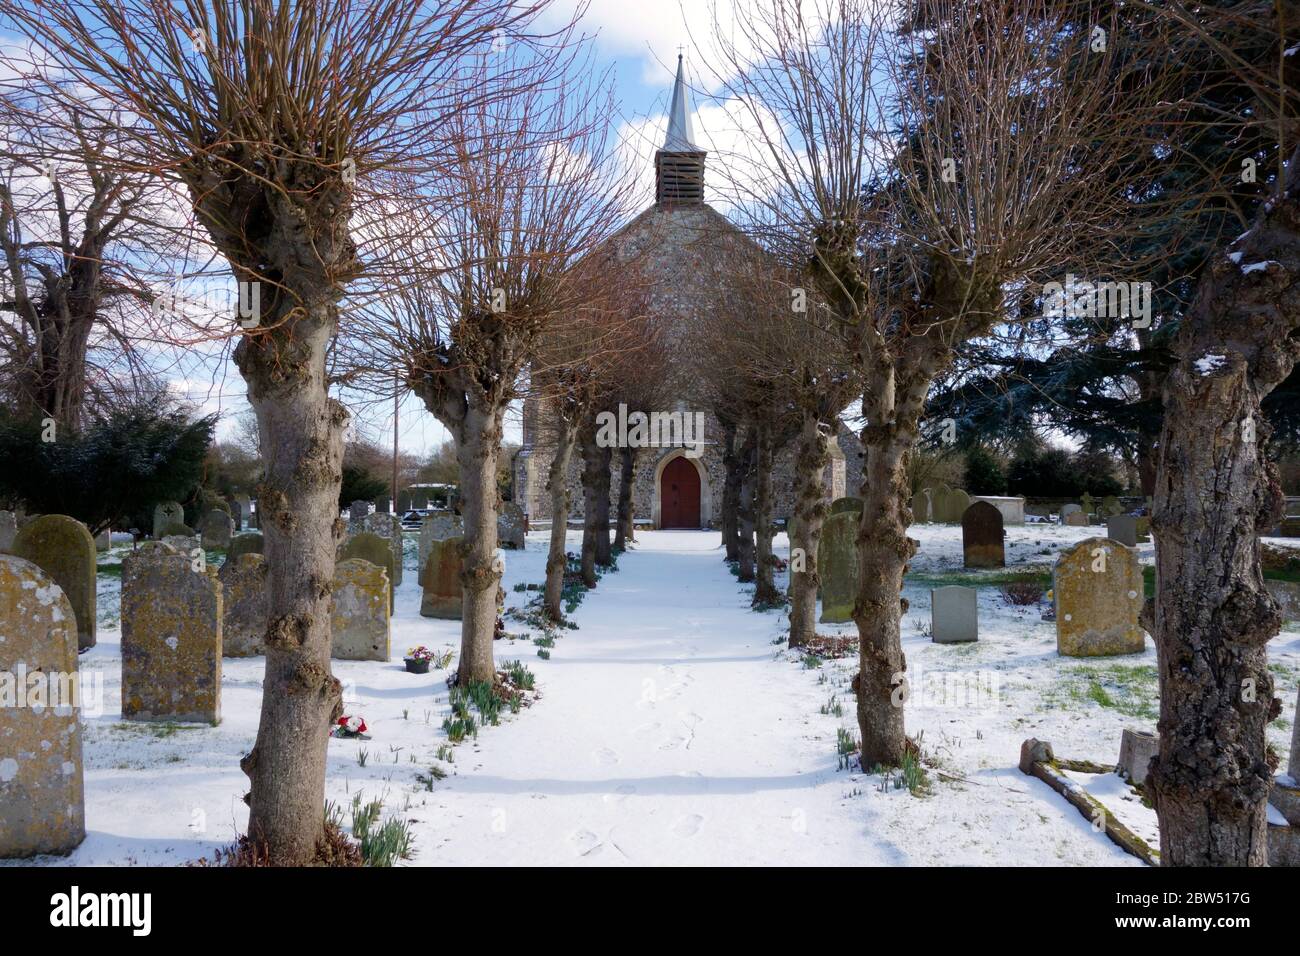 The church of St. Peter's, Neatishead during the winter of 2017/2018 Stock Photo